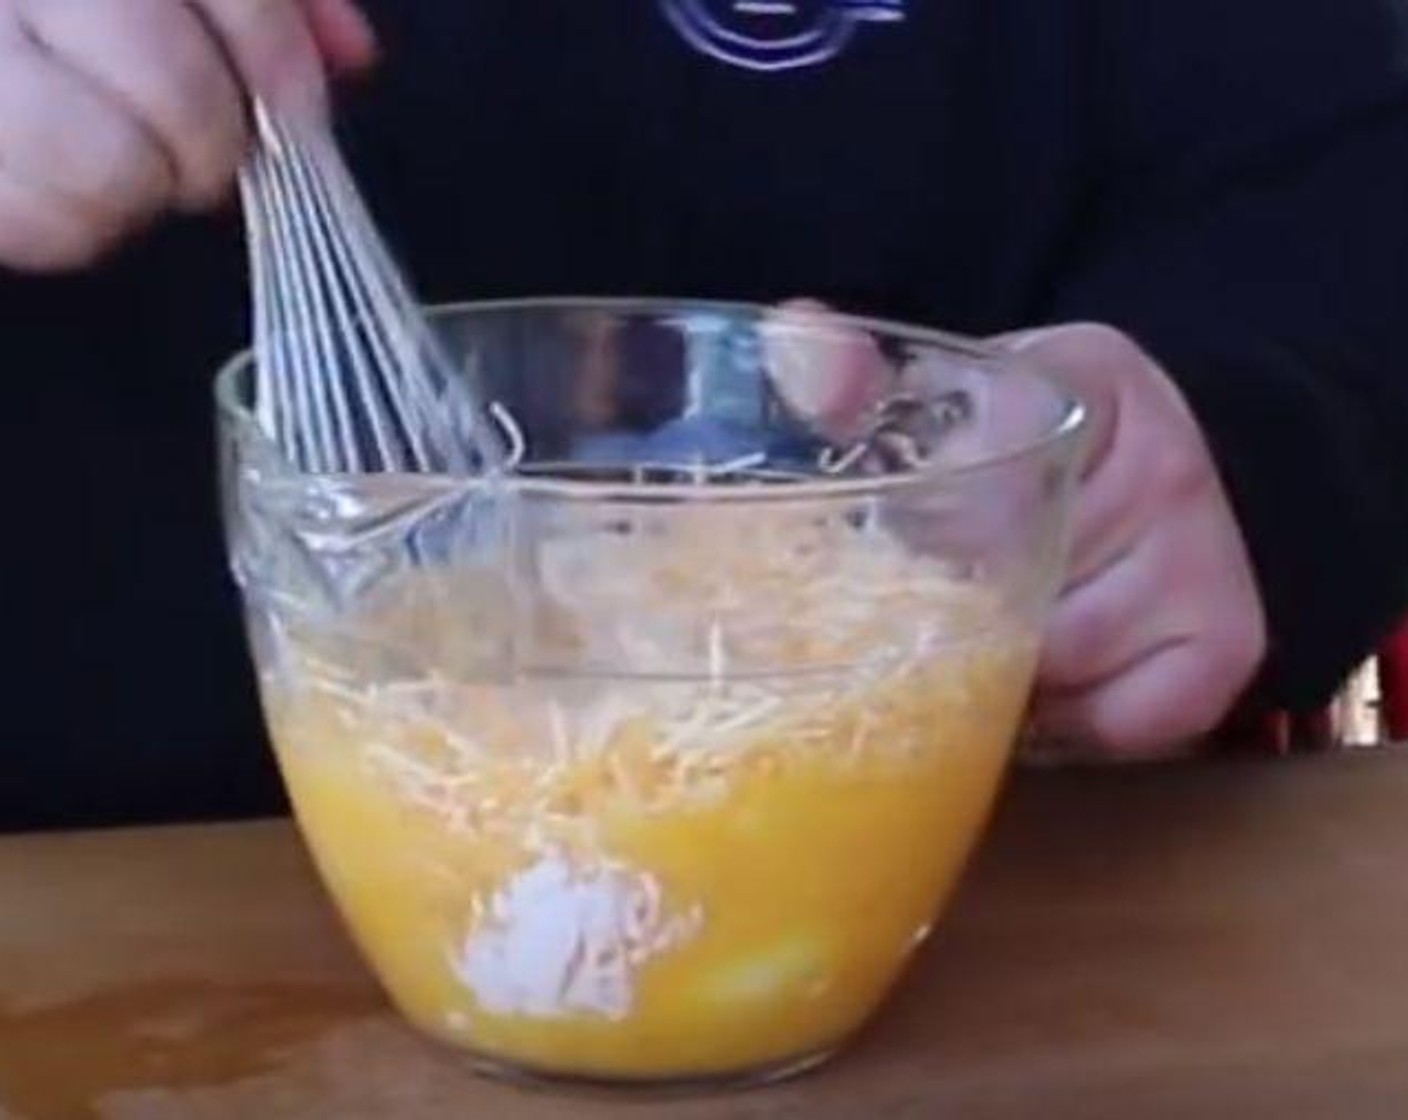 step 4 In a large mixing bowl, crack Farmhouse Eggs® Large Brown Eggs (10) and whisk. Add Shredded Cheese (2 cups), Sour Cream (1 cup), Hot Sauce (1 Tbsp) and a pinch of Salt (to taste) and Ground Black Pepper (to taste). Whisk to combine.